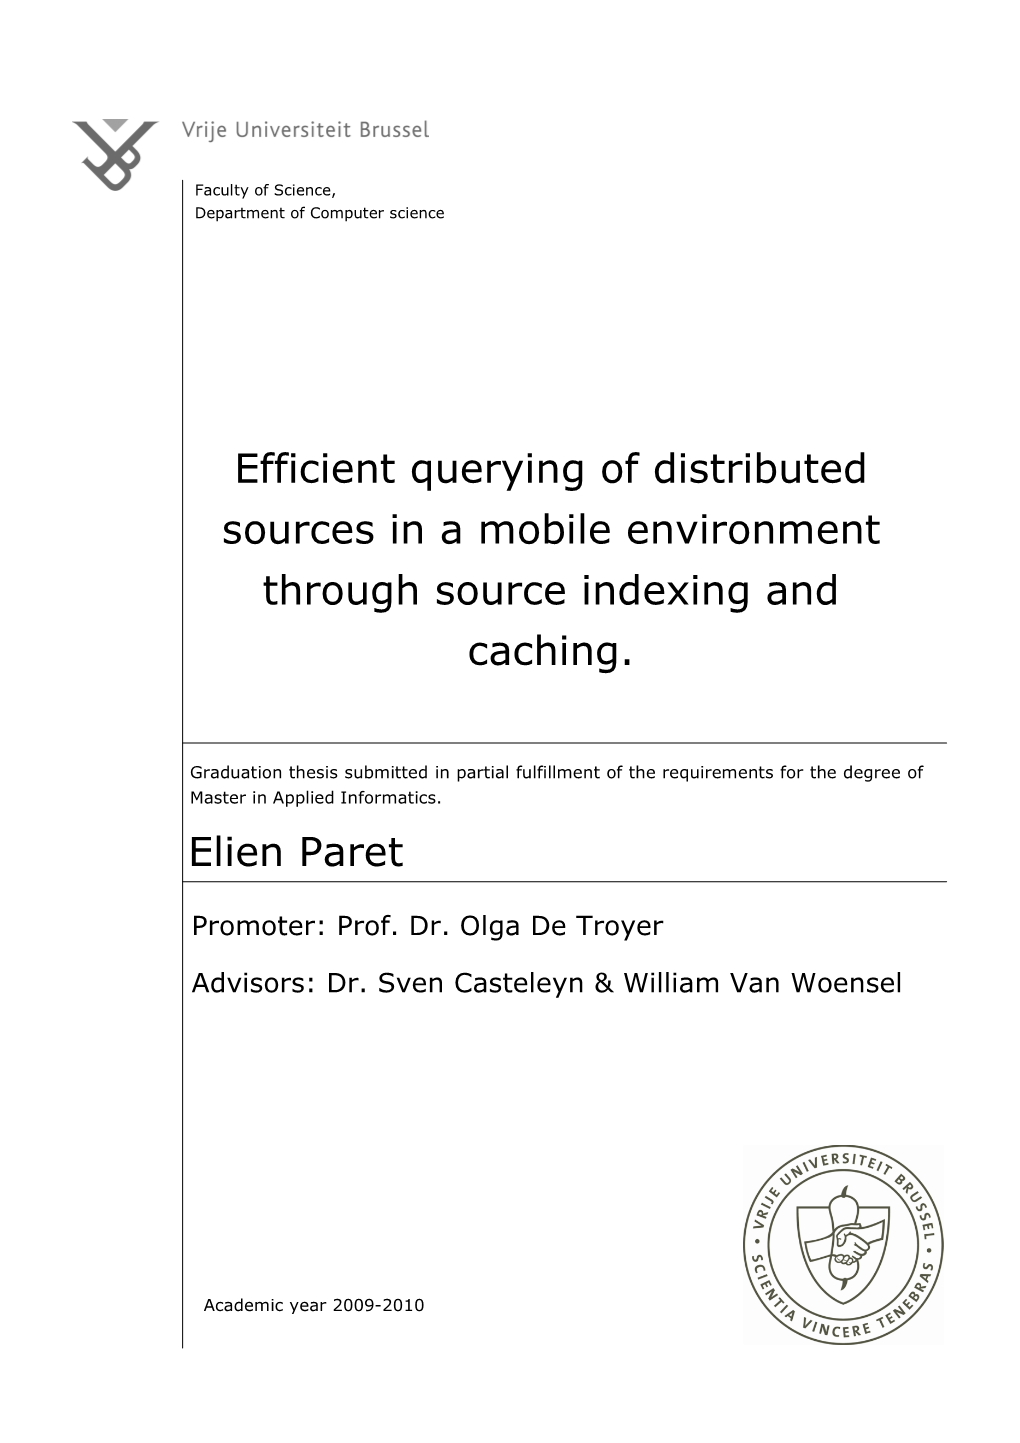 Efficient Querying of Distributed Sources in a Mobile Environment Through Source Indexing and Caching